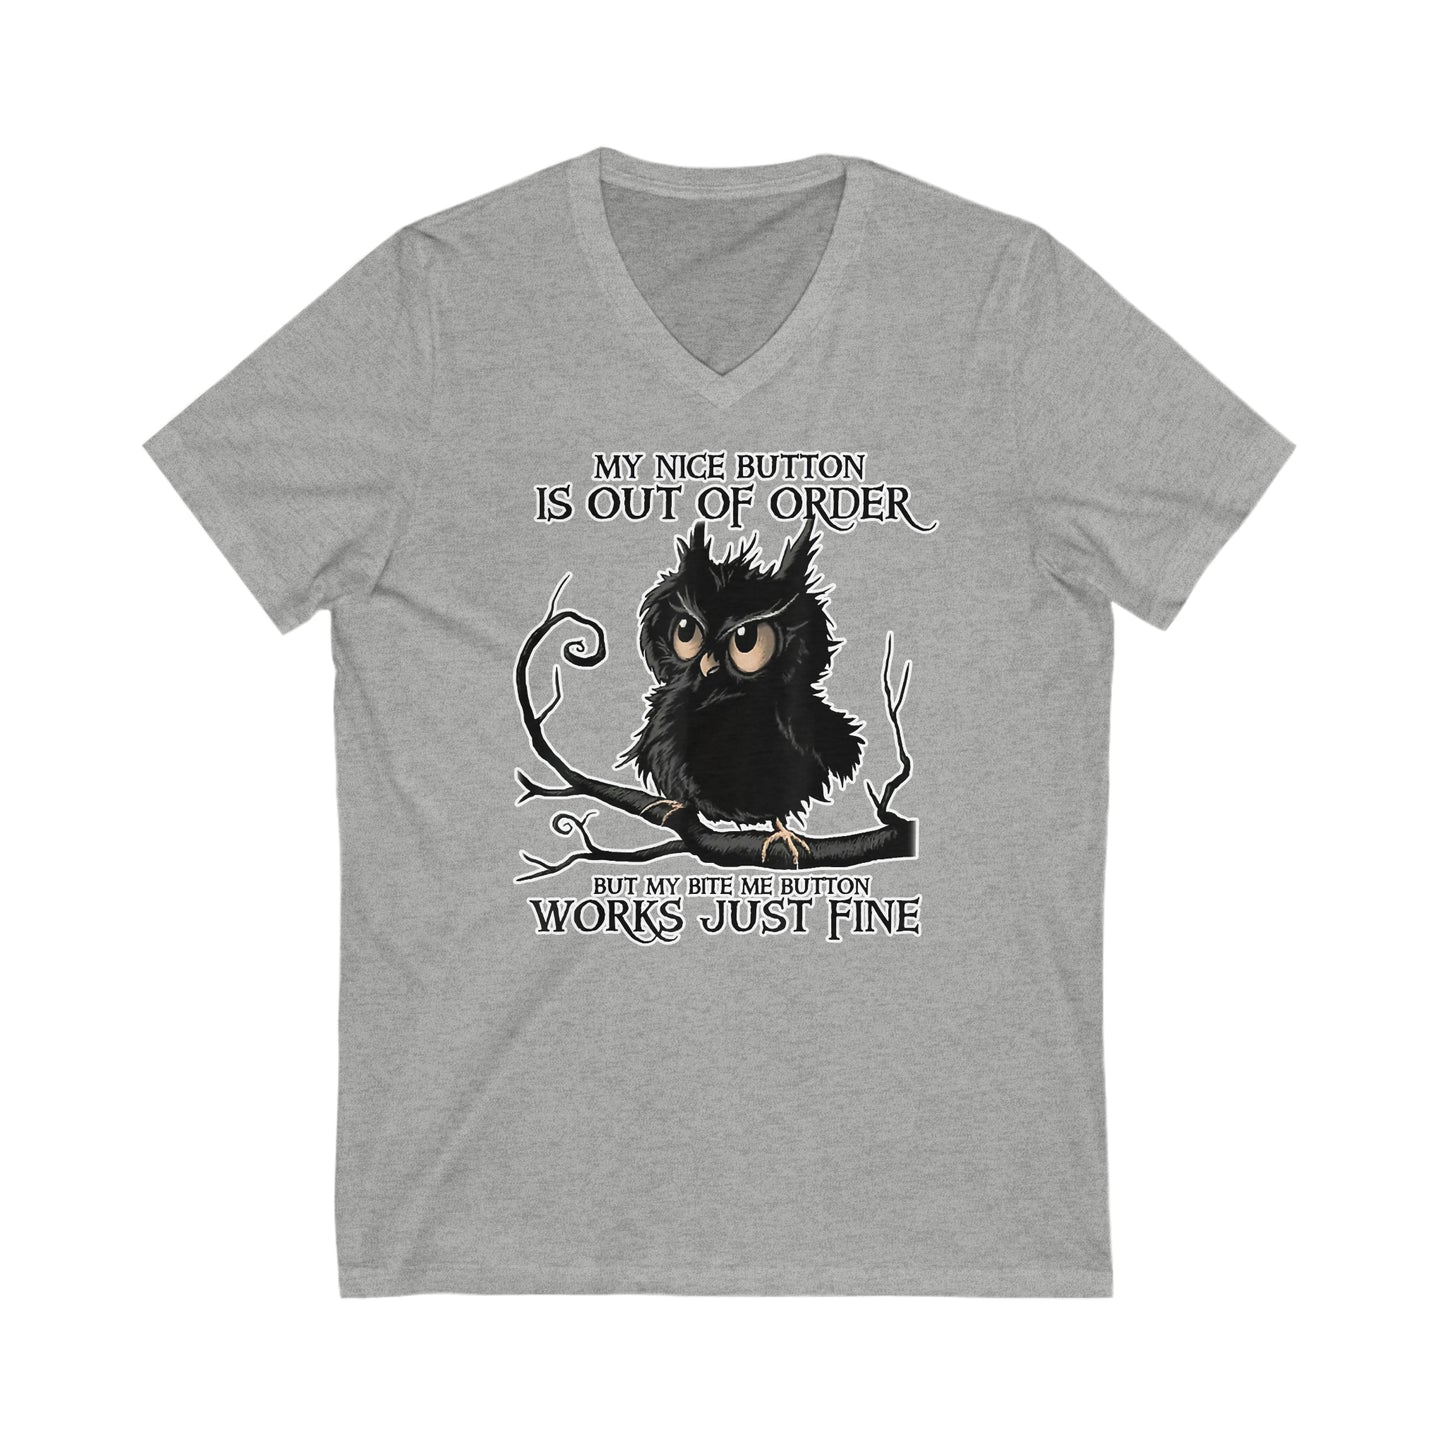 My Nice Button is Out of Order but my Bite Me Button Works Just Fine: Unisex Jersey Short Sleeve V-Neck Tee